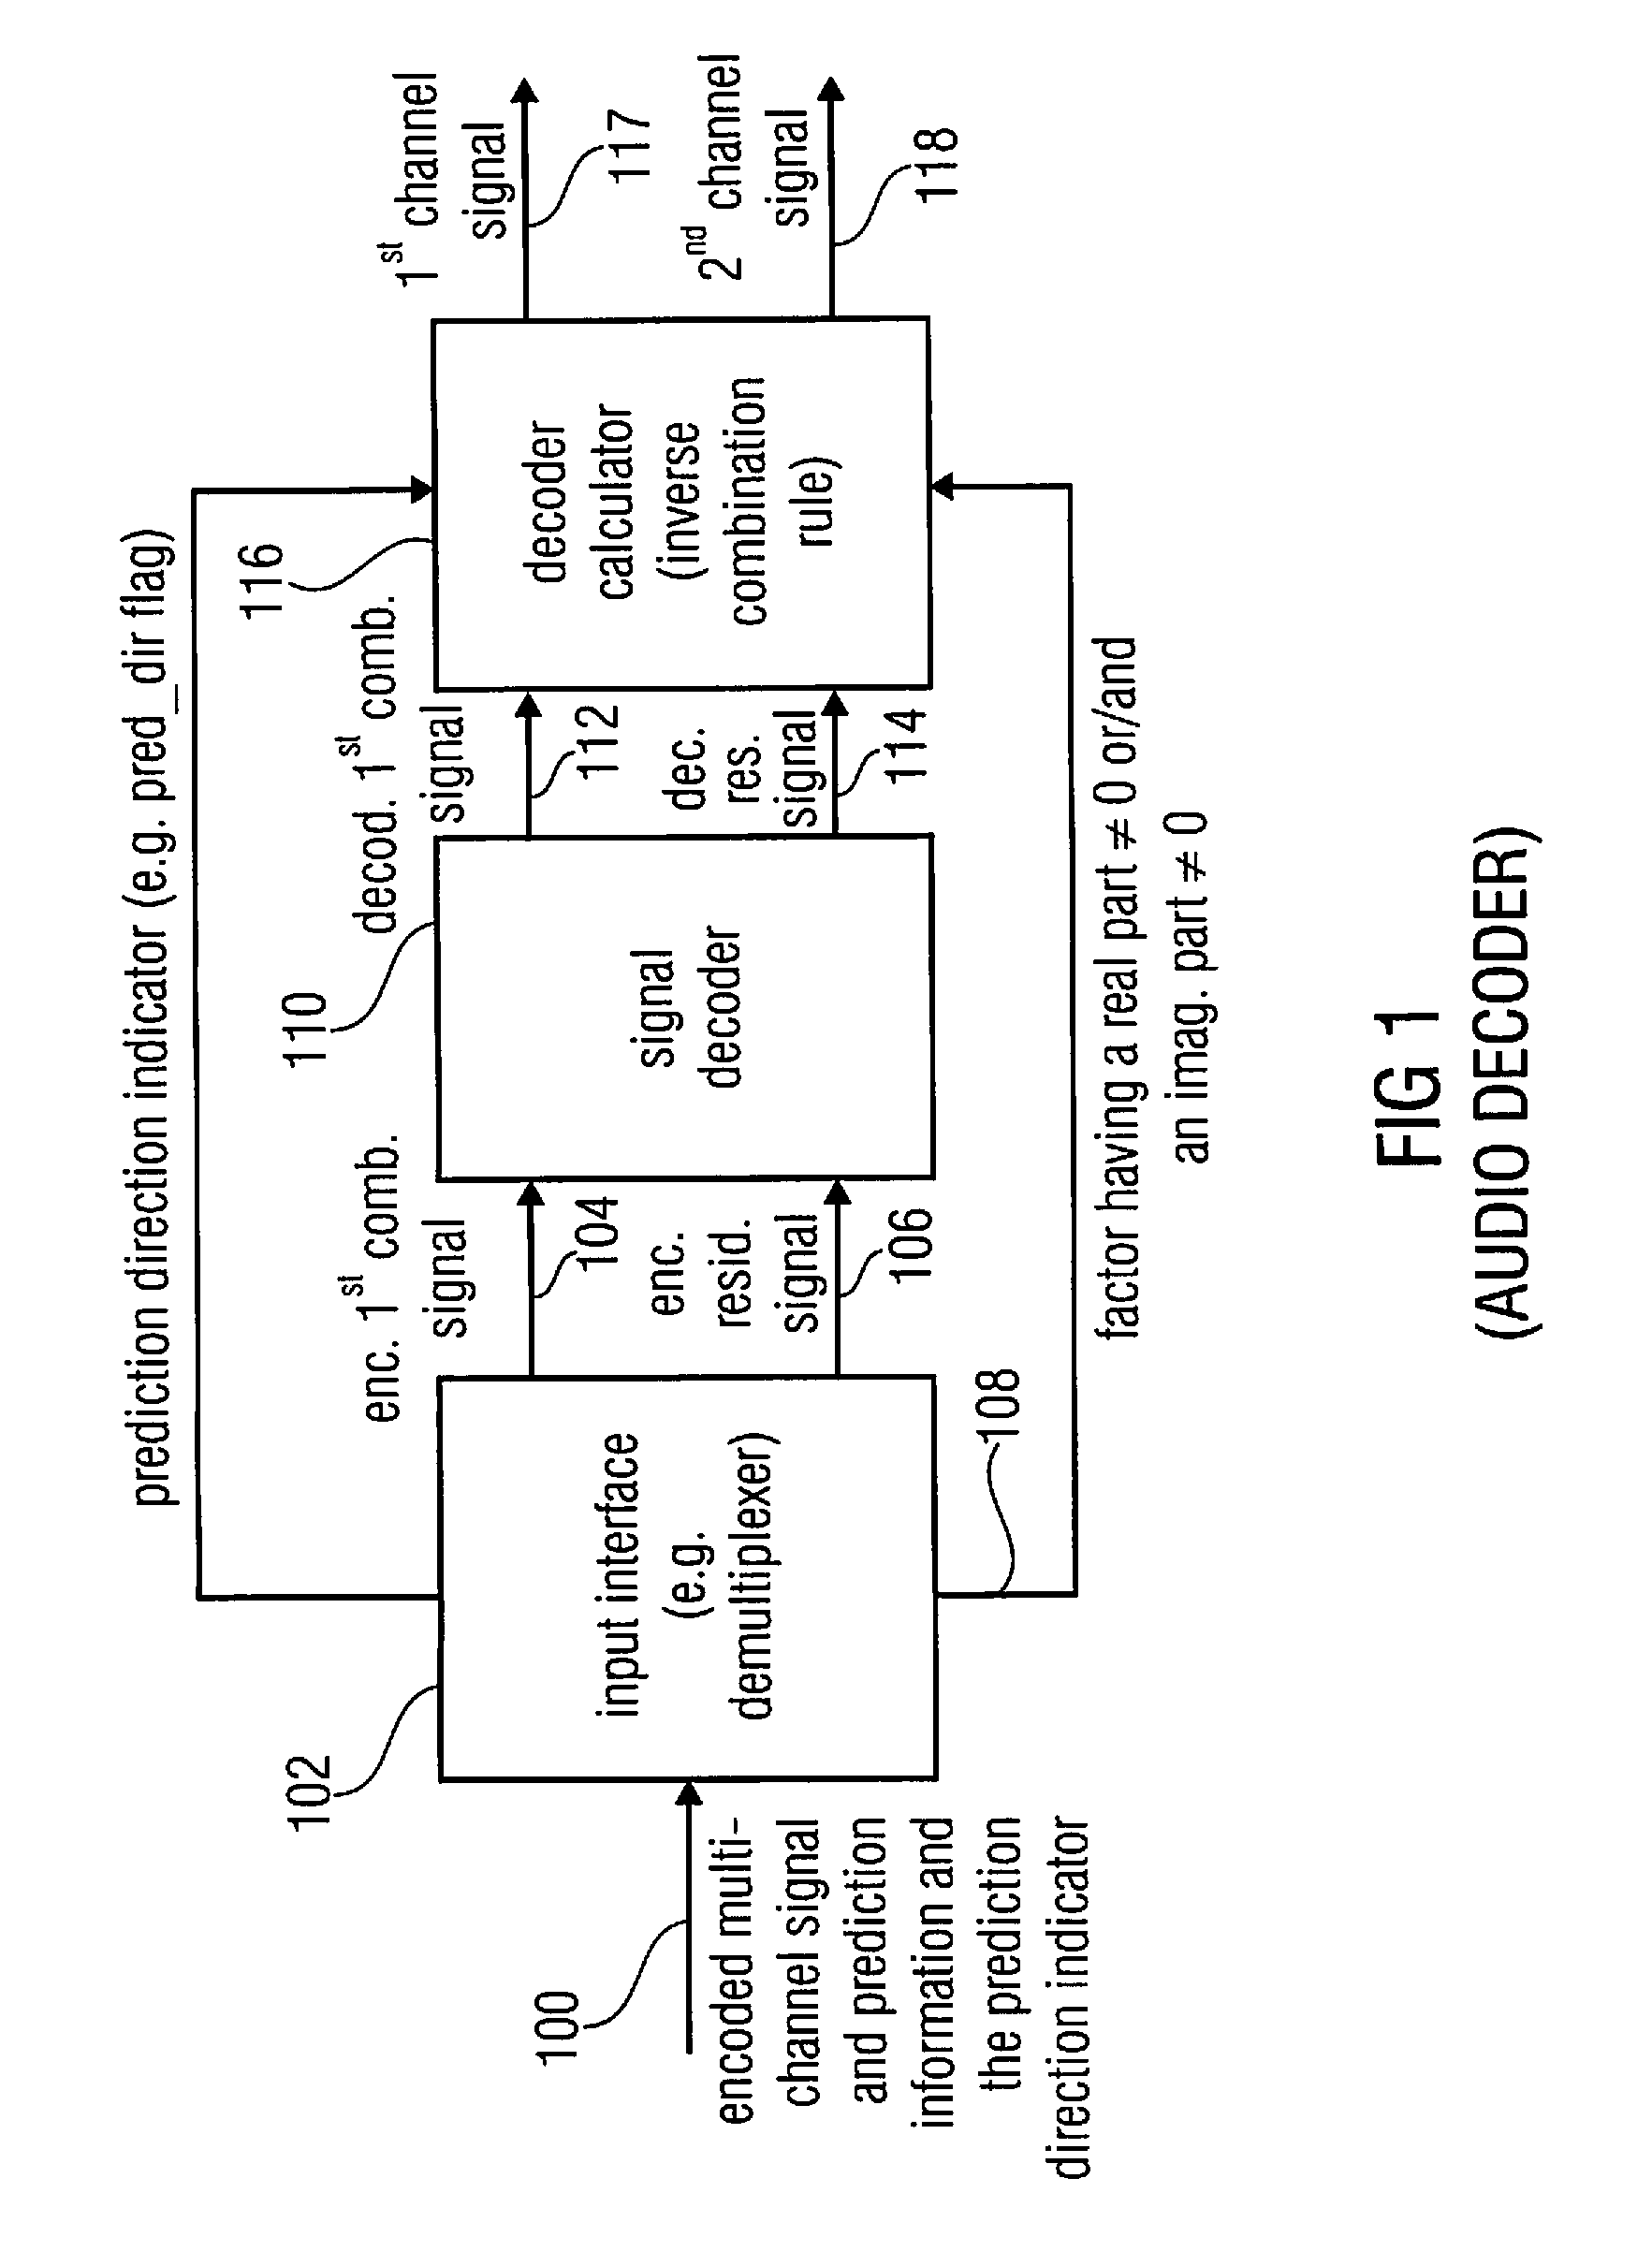 Audio or video encoder, audio or video decoder and related methods for processing multi-channel audio or video signals using a variable prediction direction